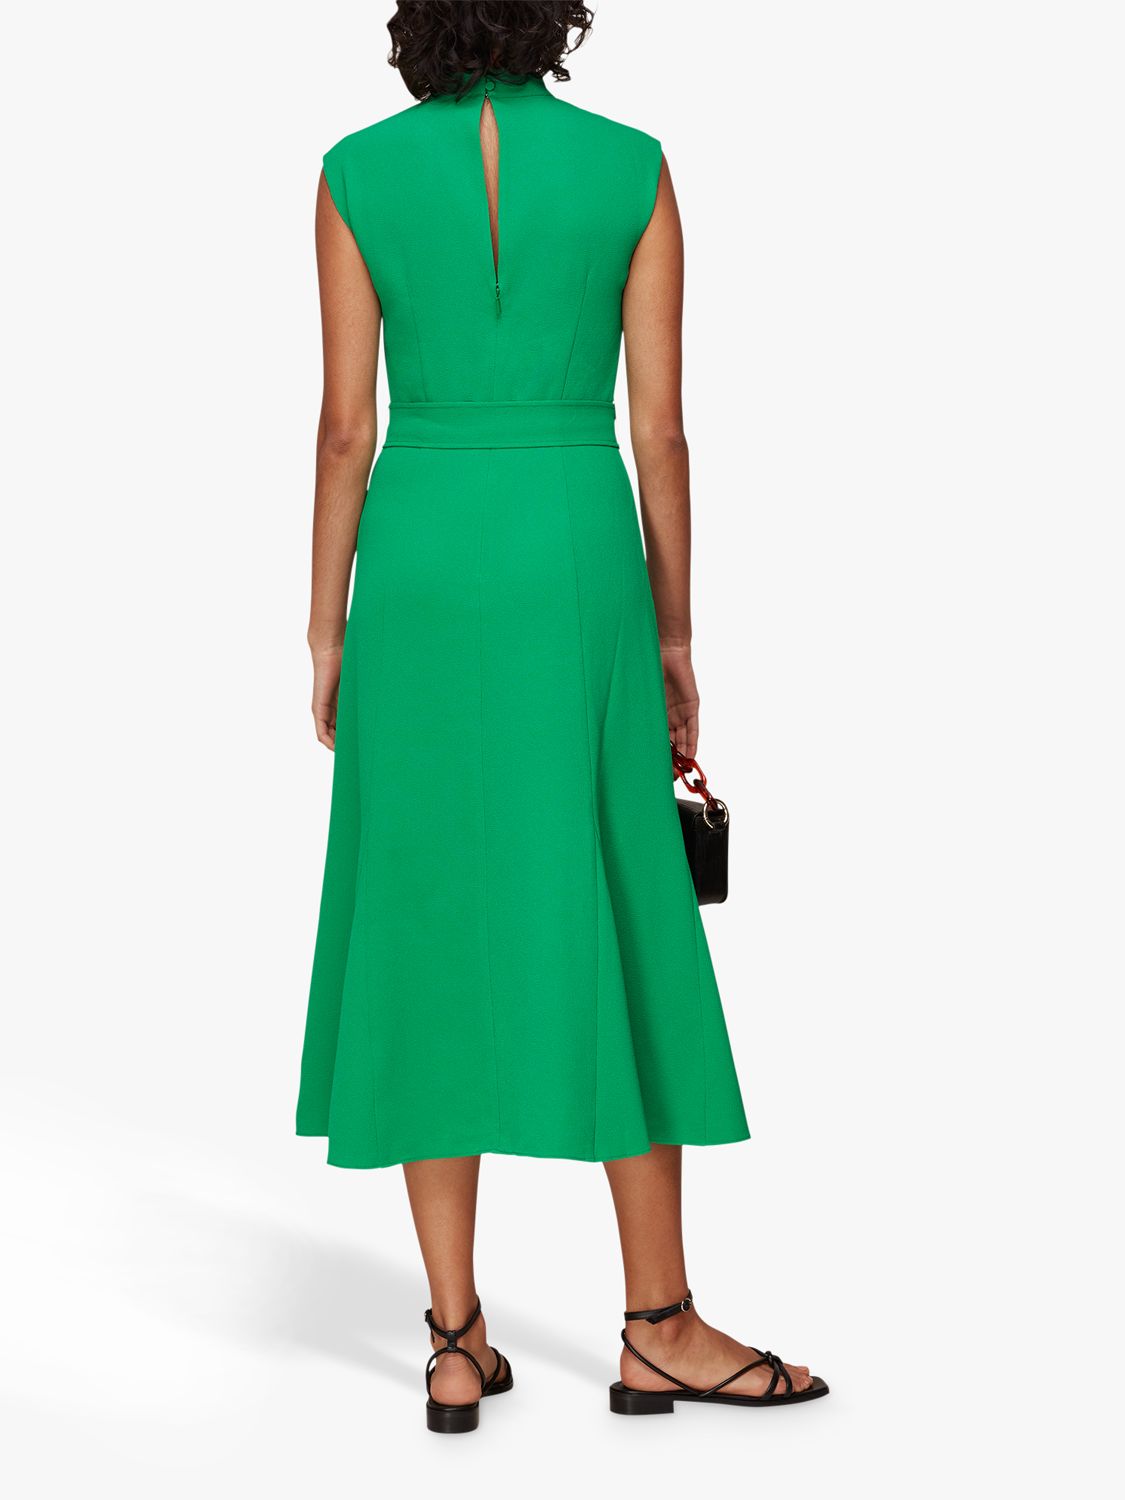 Whistles Penny Sleeveless Belted Dress, Green at John Lewis & Partners